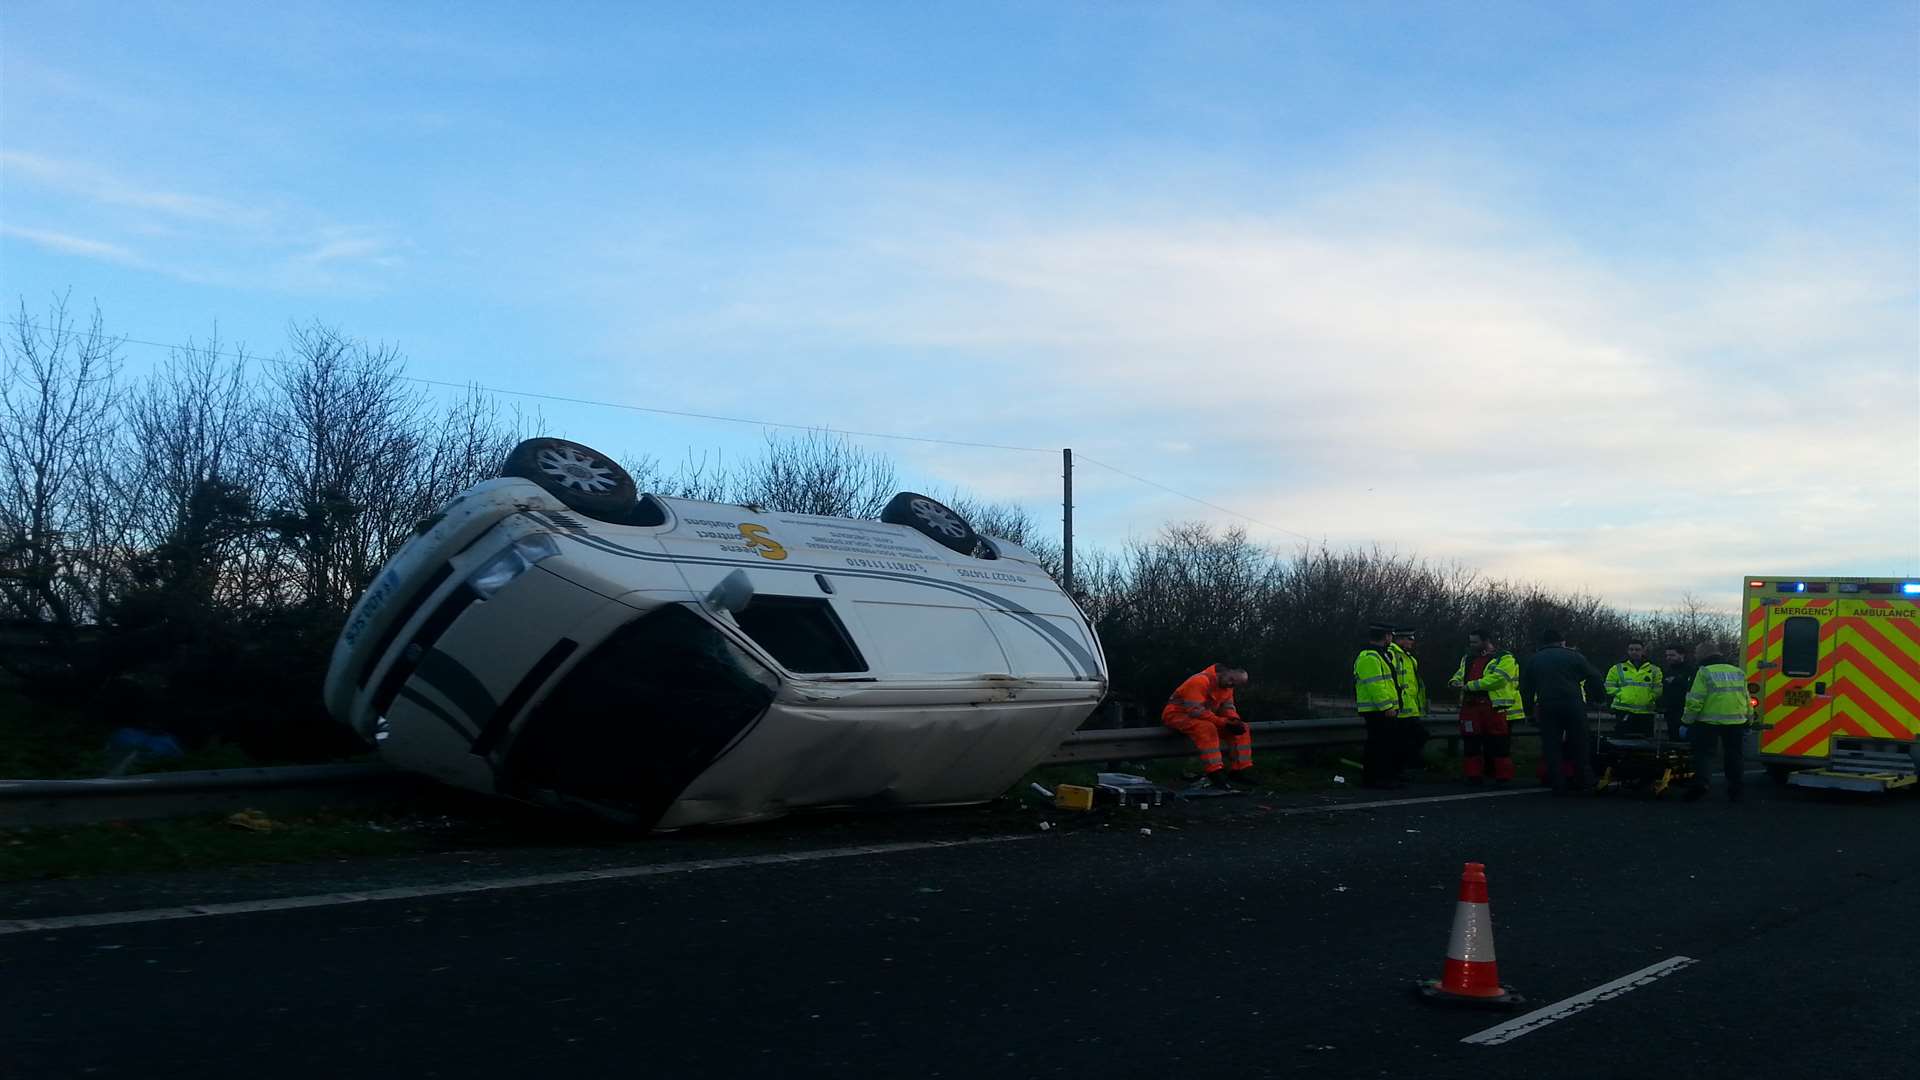 A van overturned near the Staplestreet turn-off during the morning rush hour